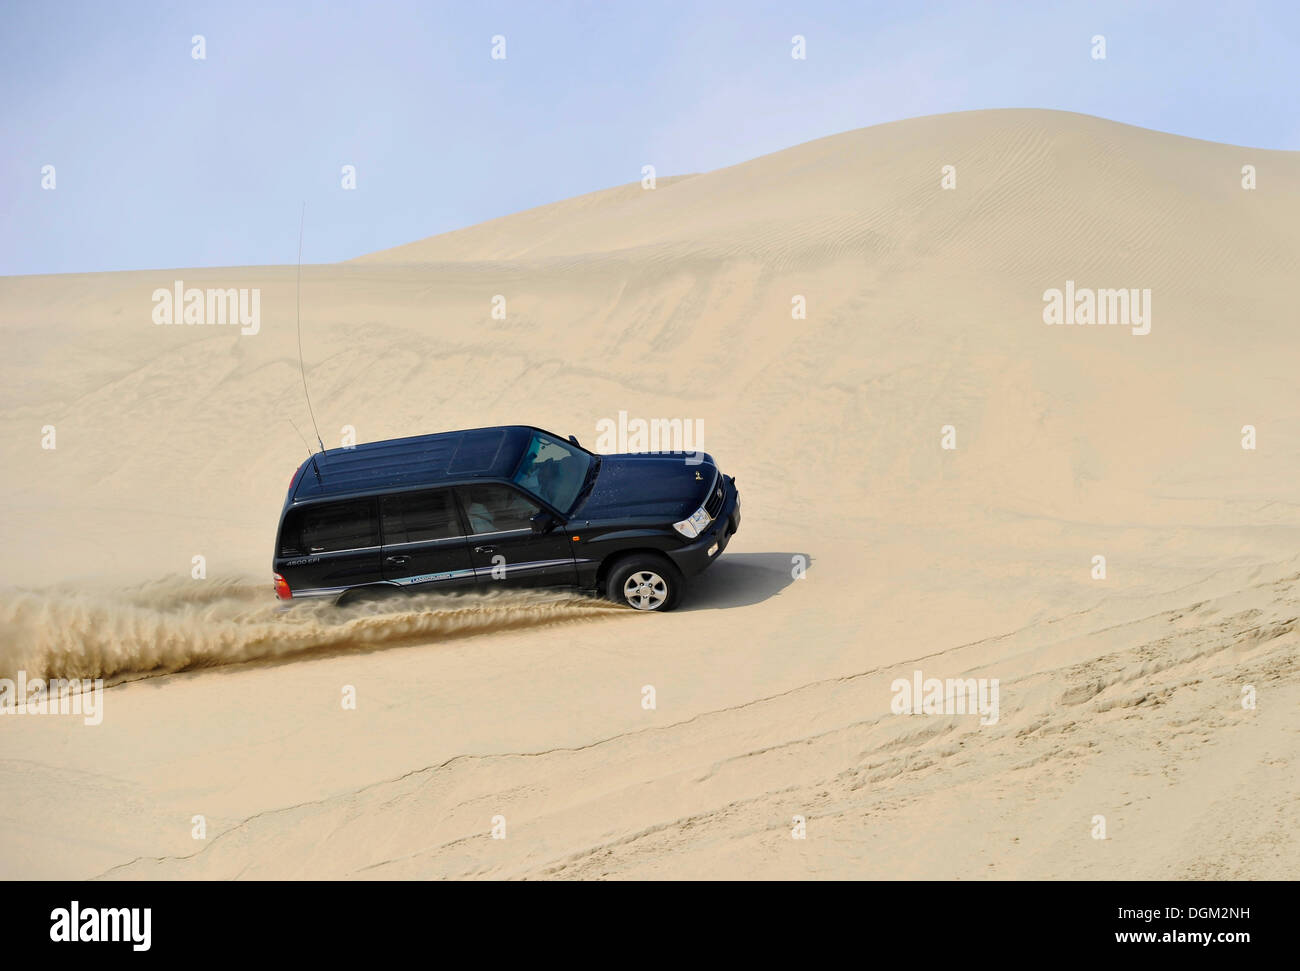 Off-roader Toyota Land Cruiser 4x4, driving in sand dunes, Emirate of Qatar, Persian Gulf, Middle East, Asia Stock Photo